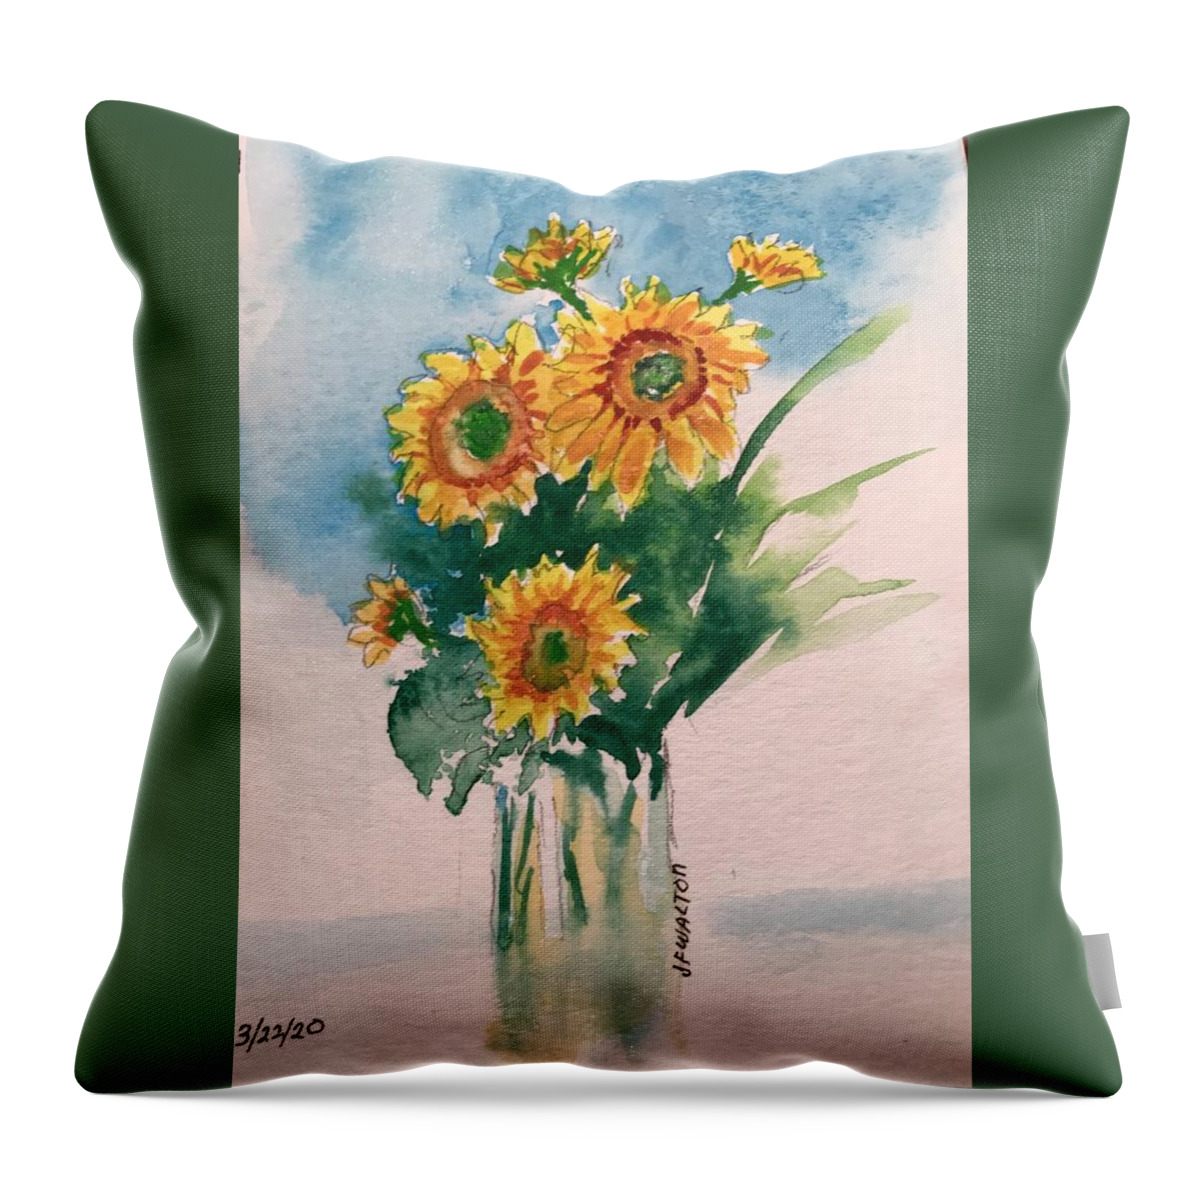 Sunflowers. Floral.yellow Bouquet. Throw Pillow featuring the painting Sunflower bouquet by Judy Fischer Walton